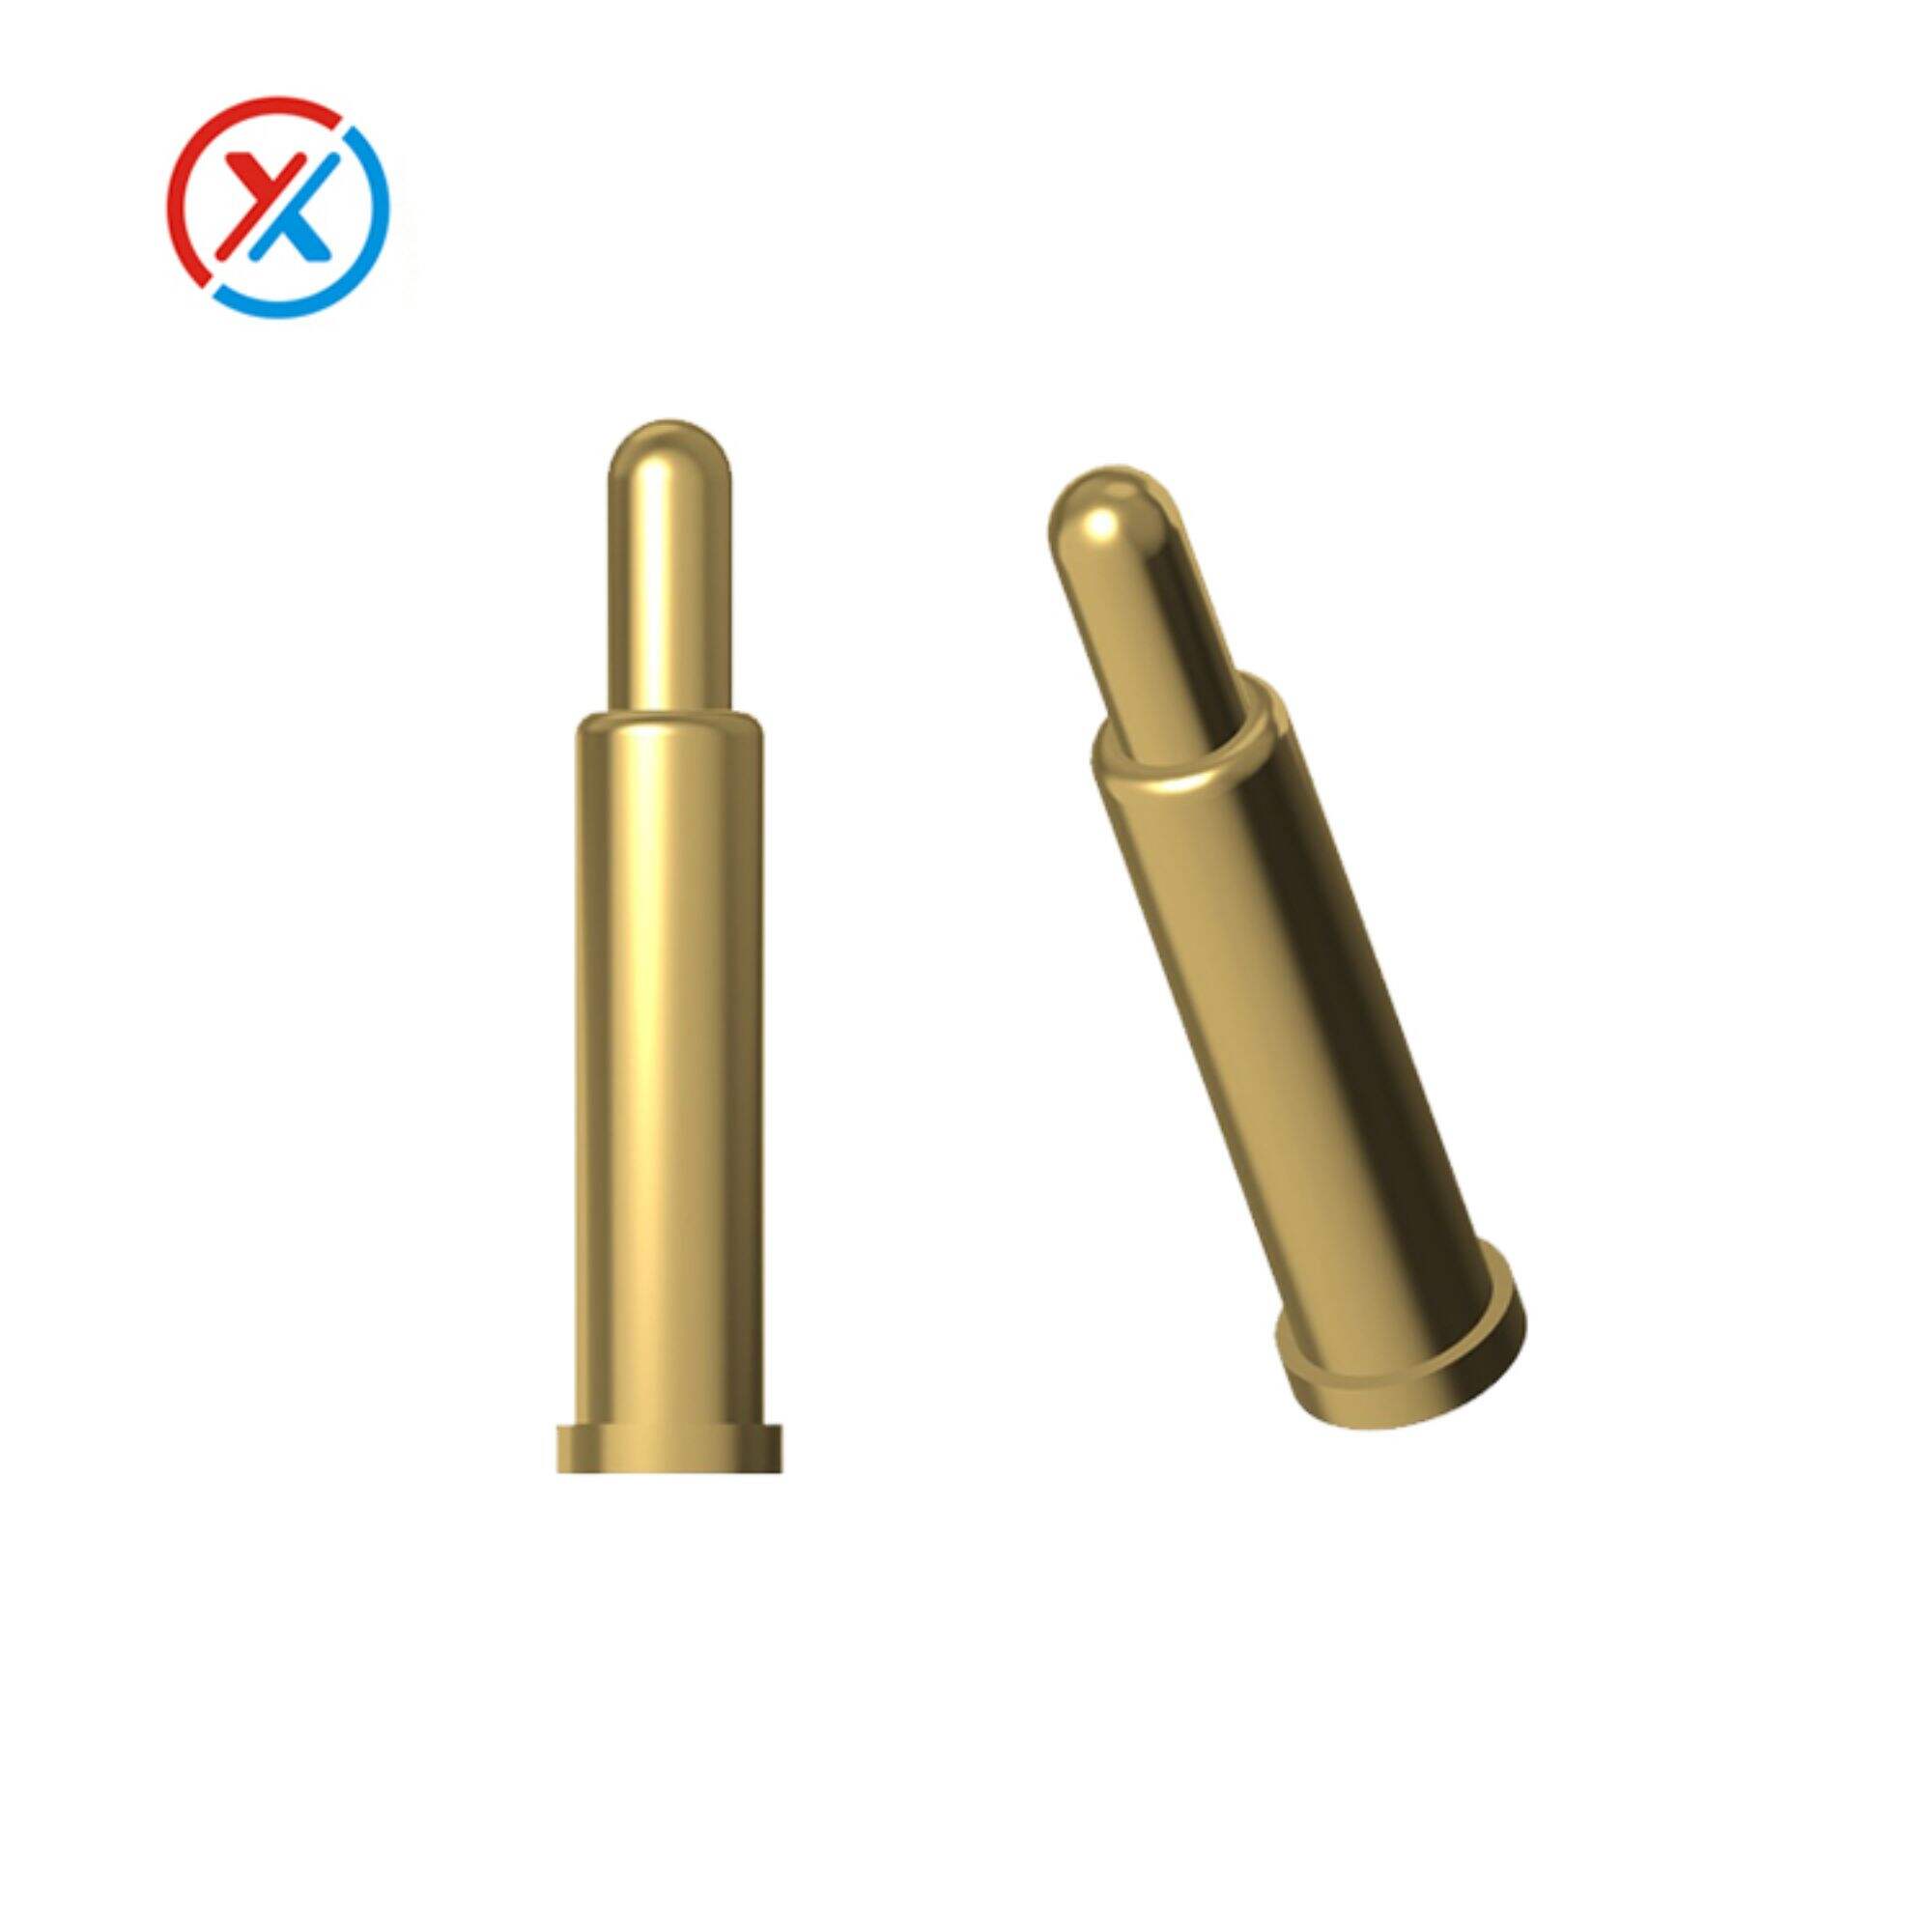 male spring loaded pogo pin connector fast connector pogopin